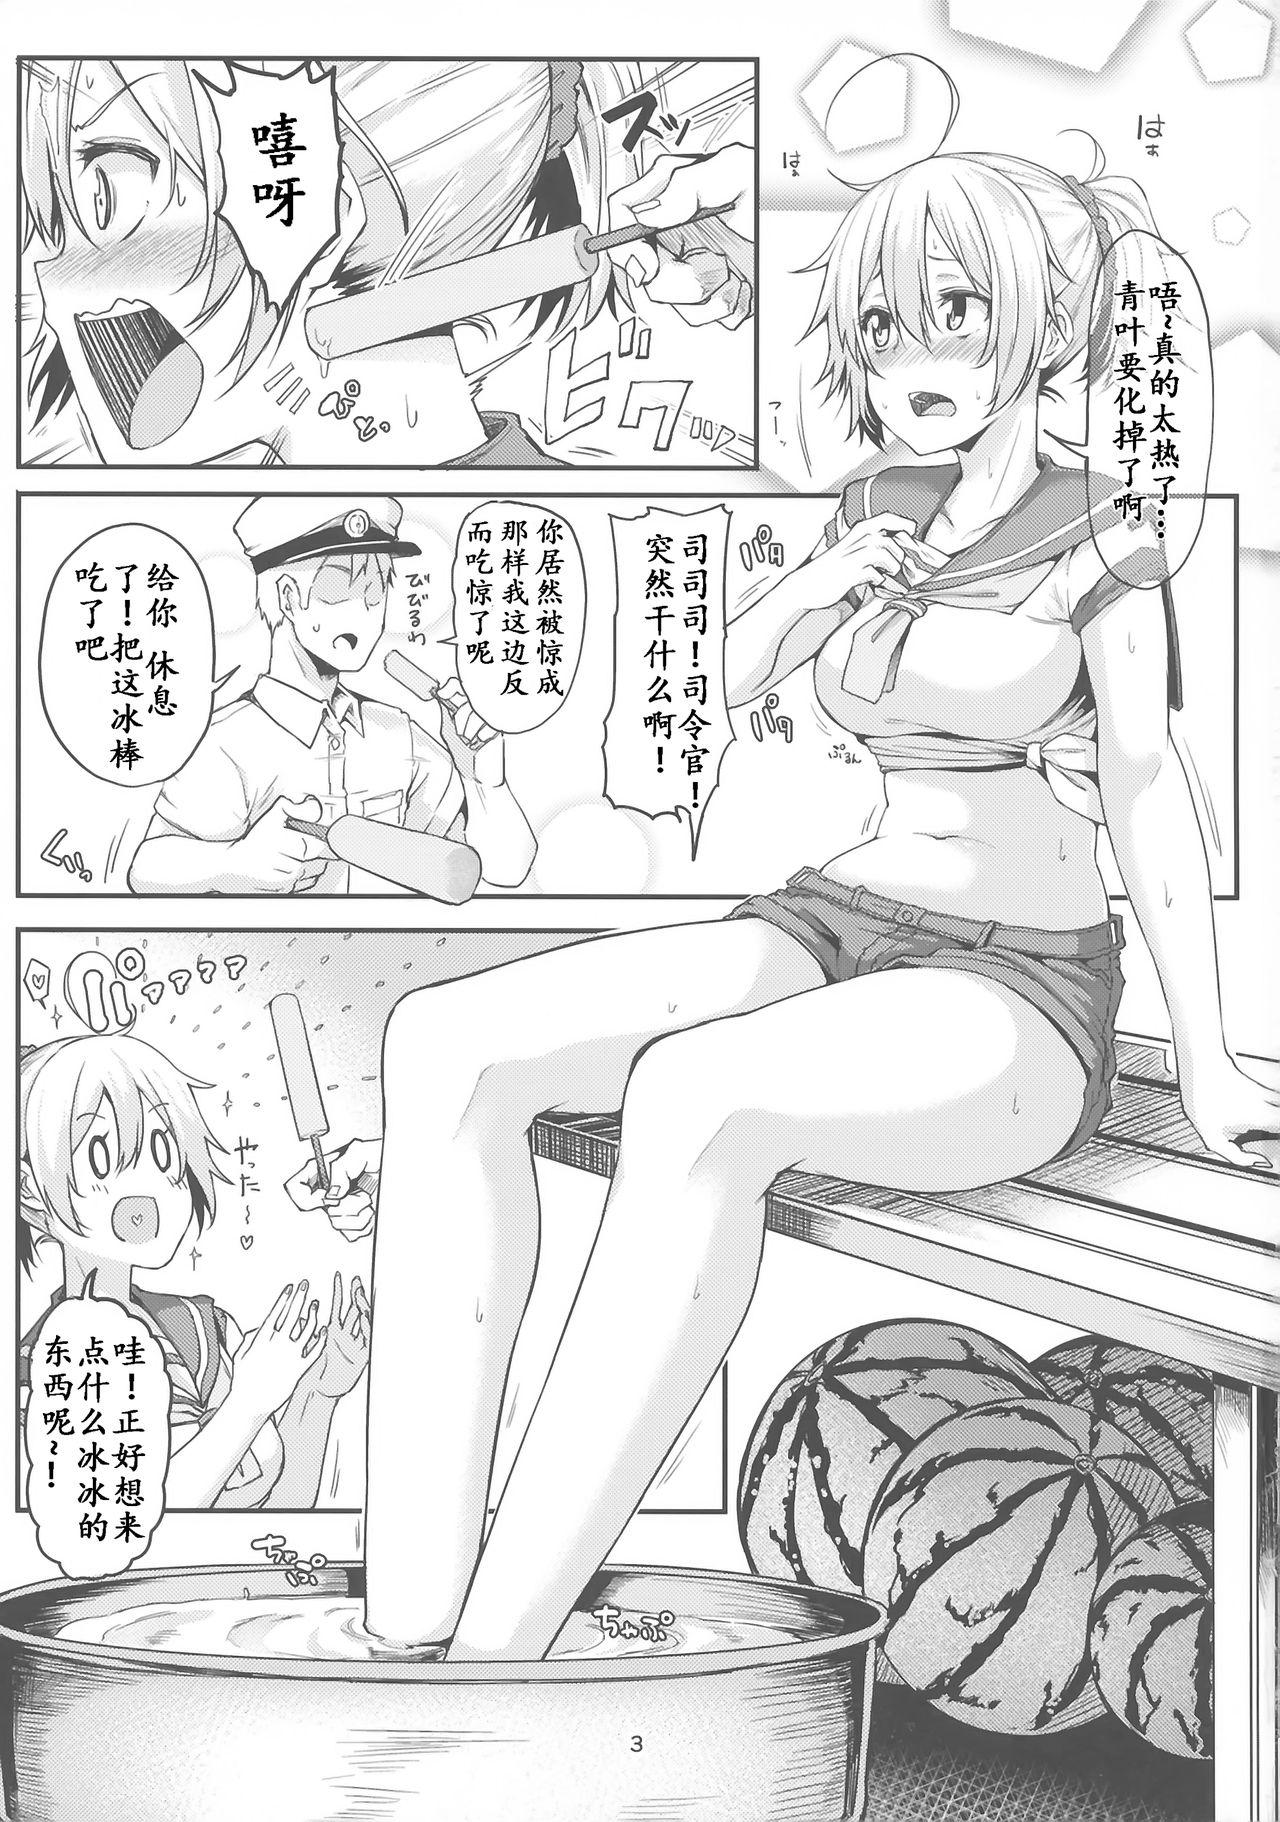 Indonesian Motto x2 Aobax! - Kantai collection Amatuer - Page 4